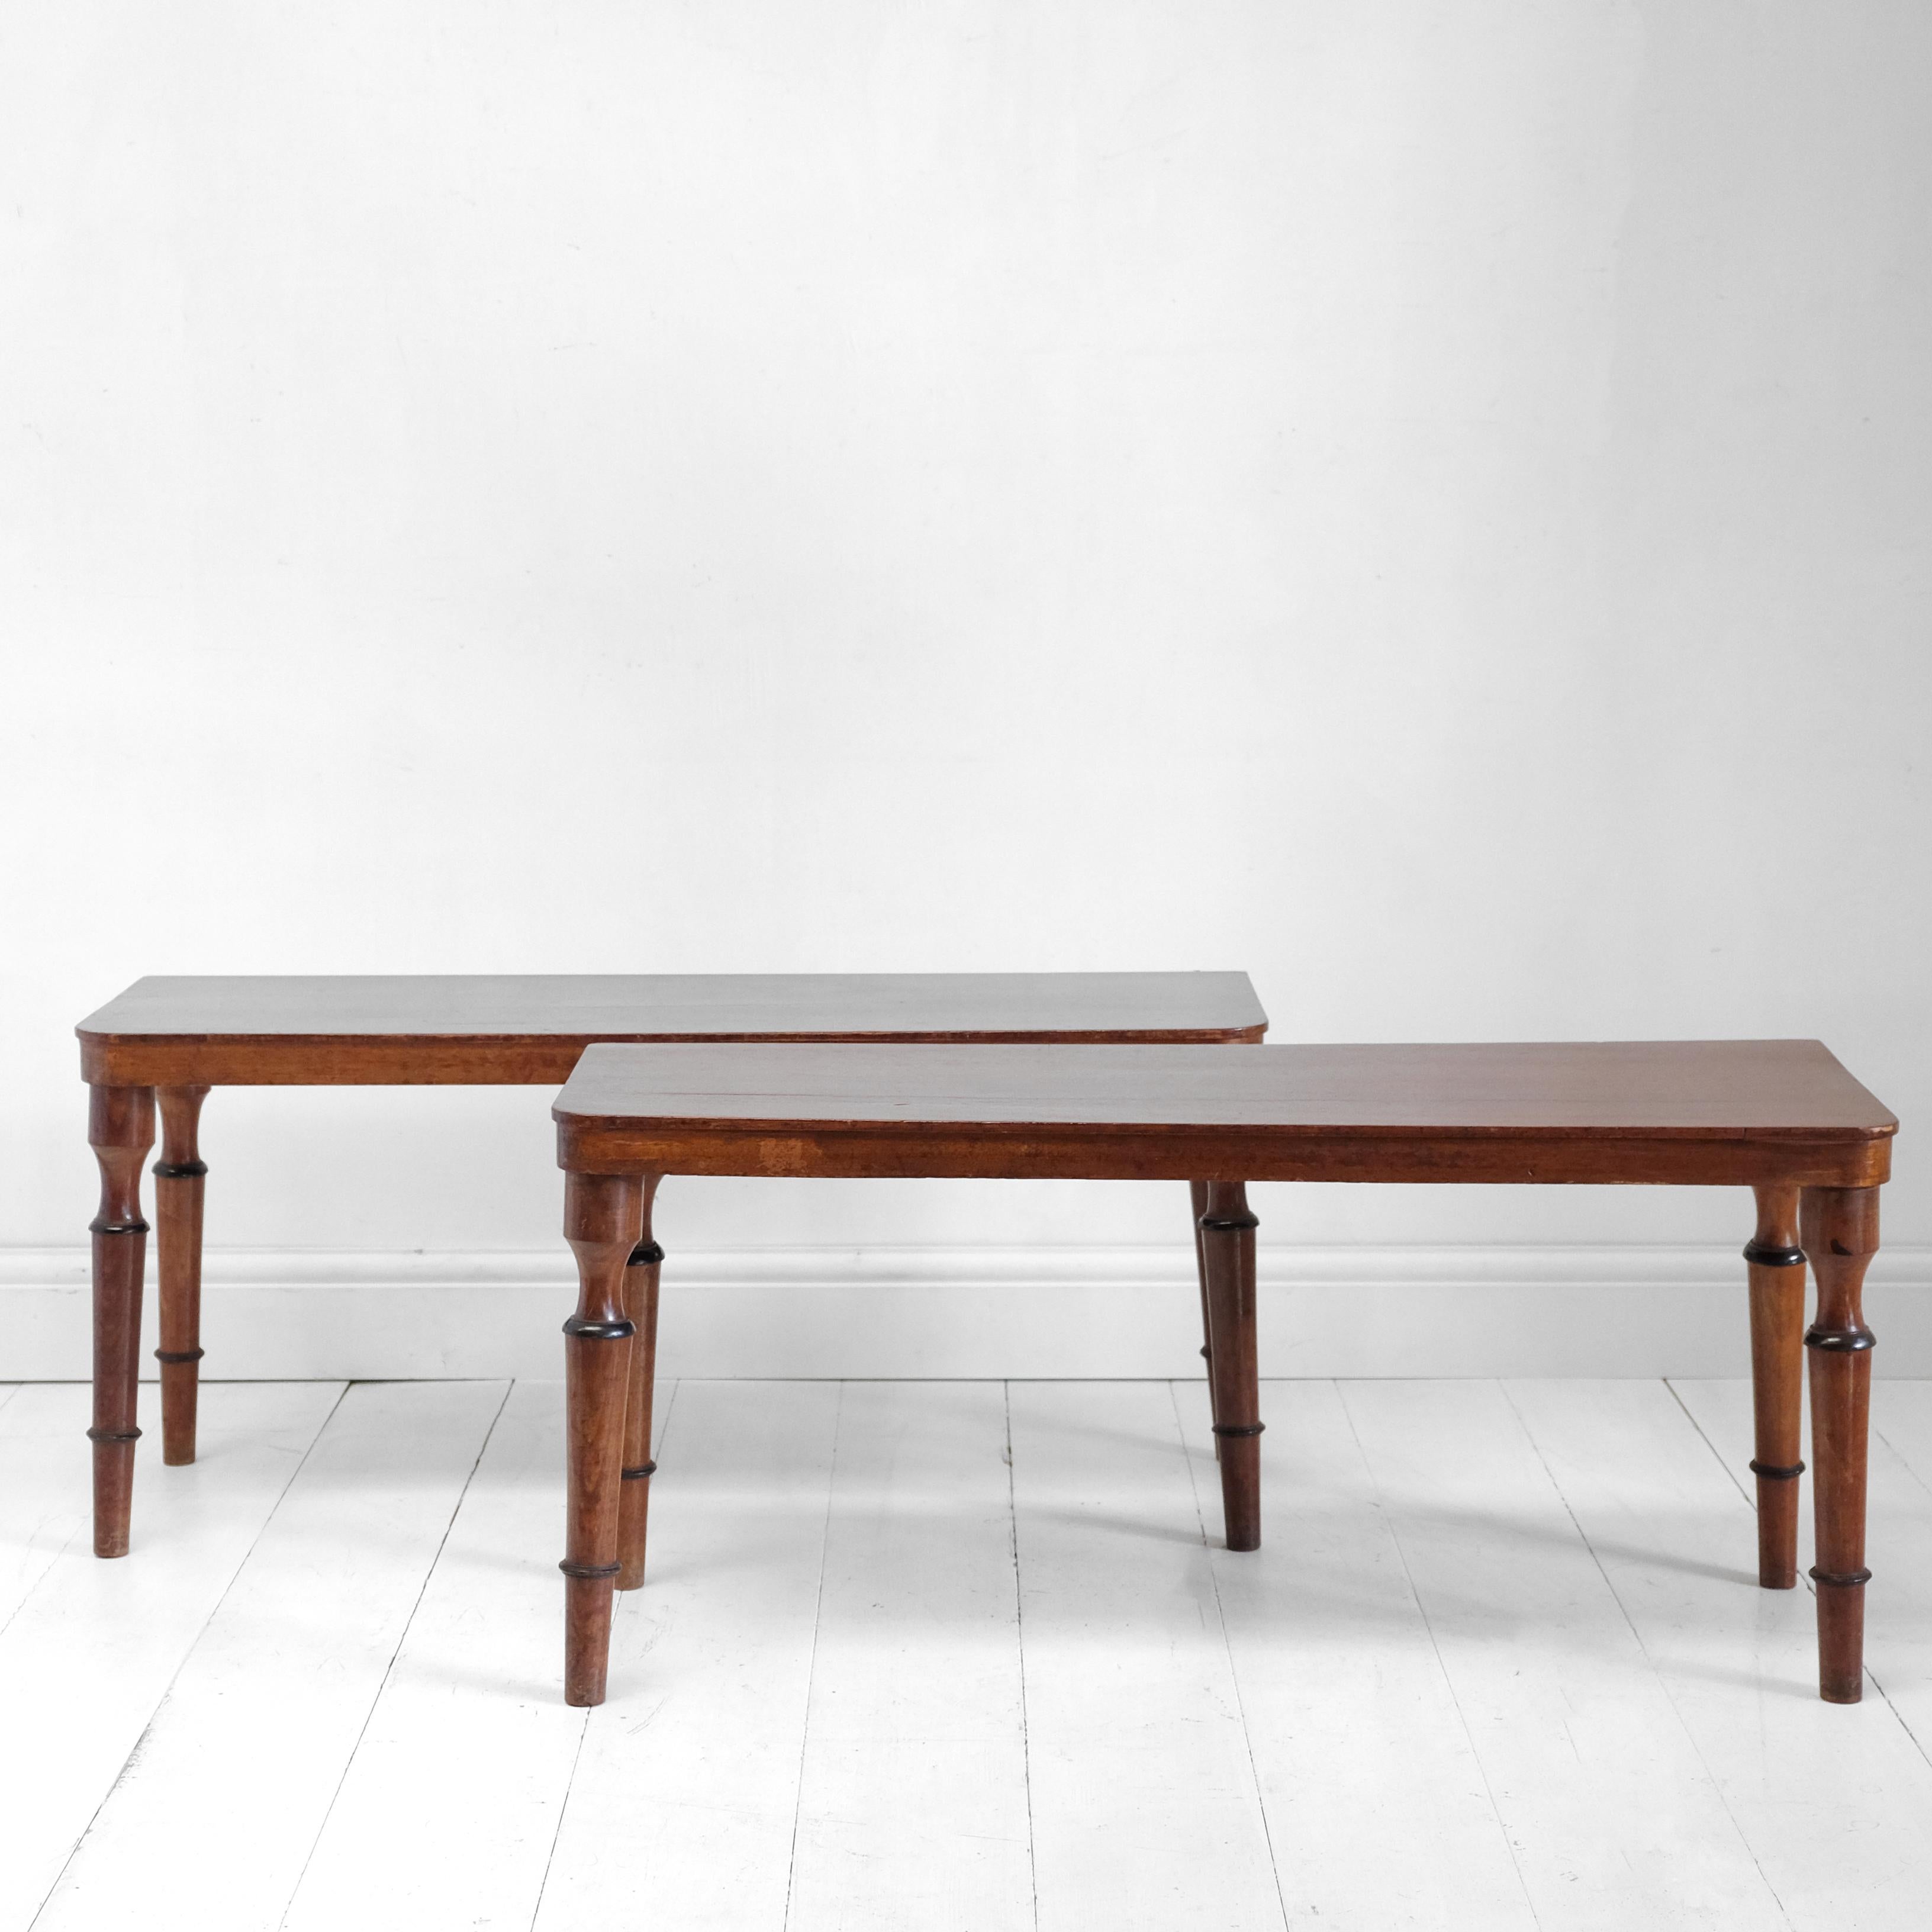 A matching pair of early 20th century mahogany hall benches. Each with ring-turned legs and rectangular seats with rounded front corners. I like their simplicity and the touch of detail with the ebonized rings on each leg.

Price is for the